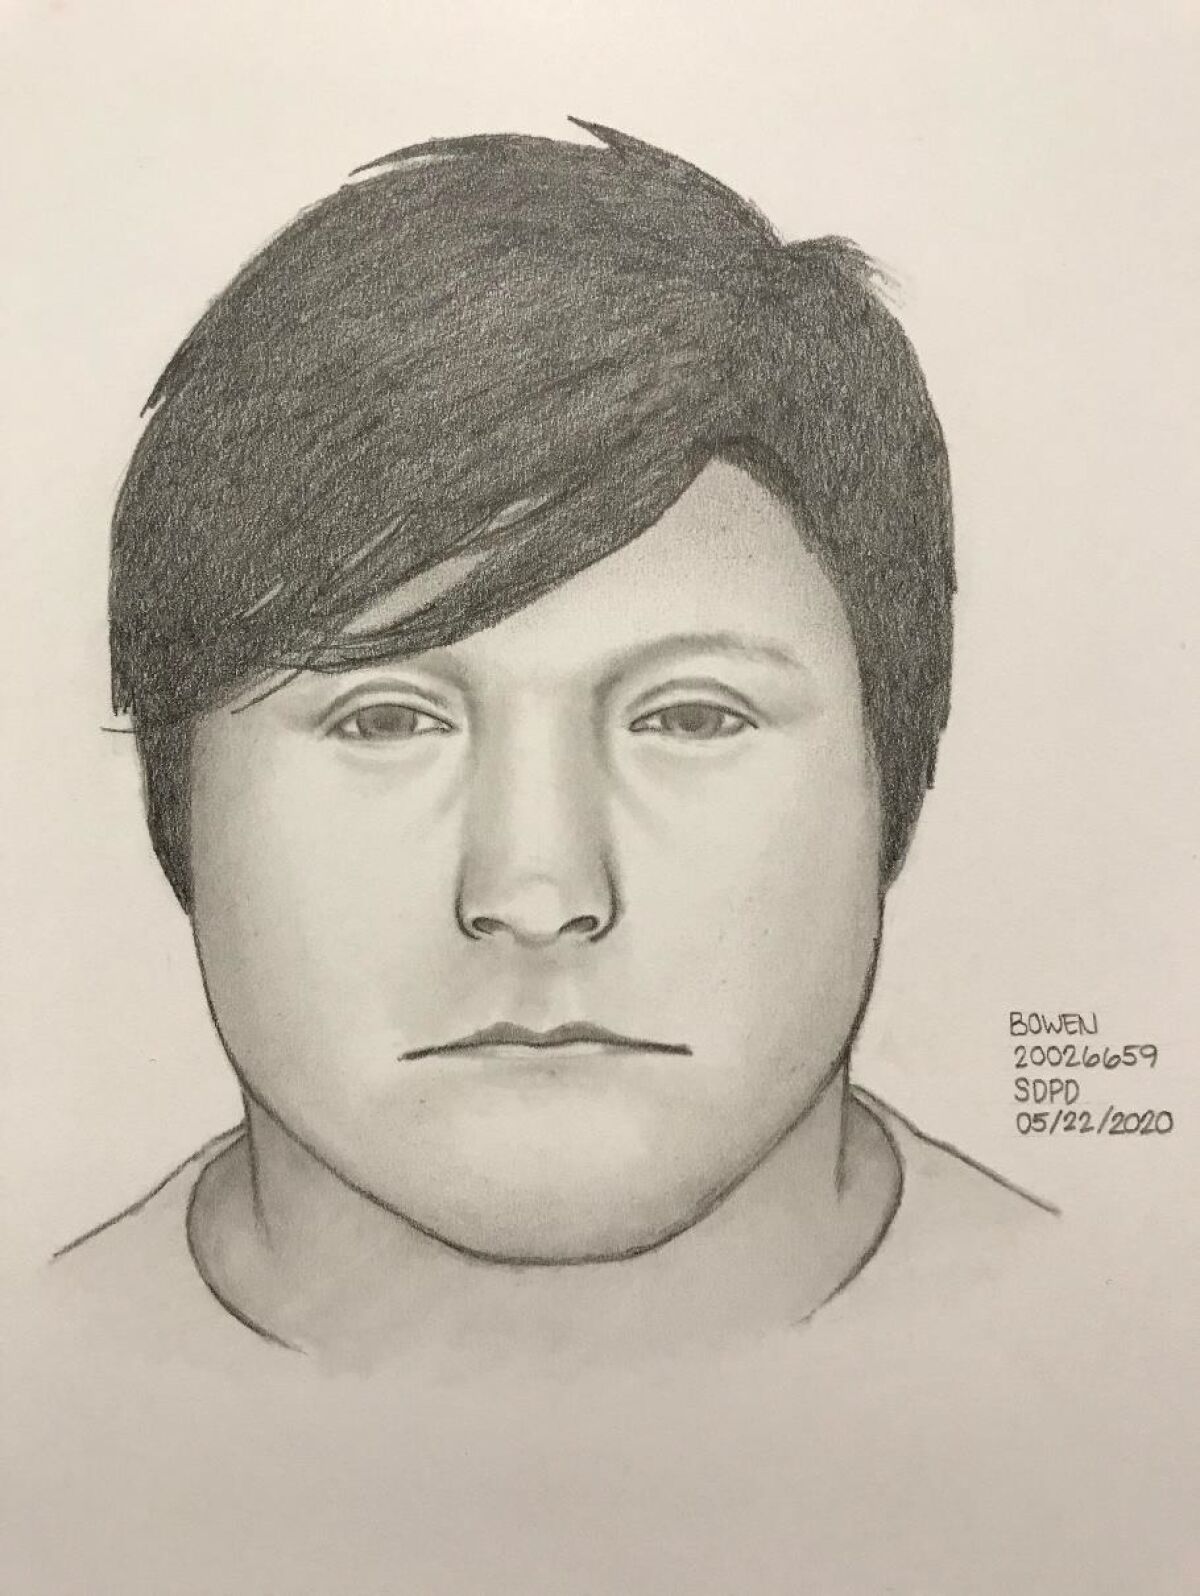 Police released this composite sketch of the man wanted for allegedly sexually assaulting a 55-year-old woman last week in the Midway District.